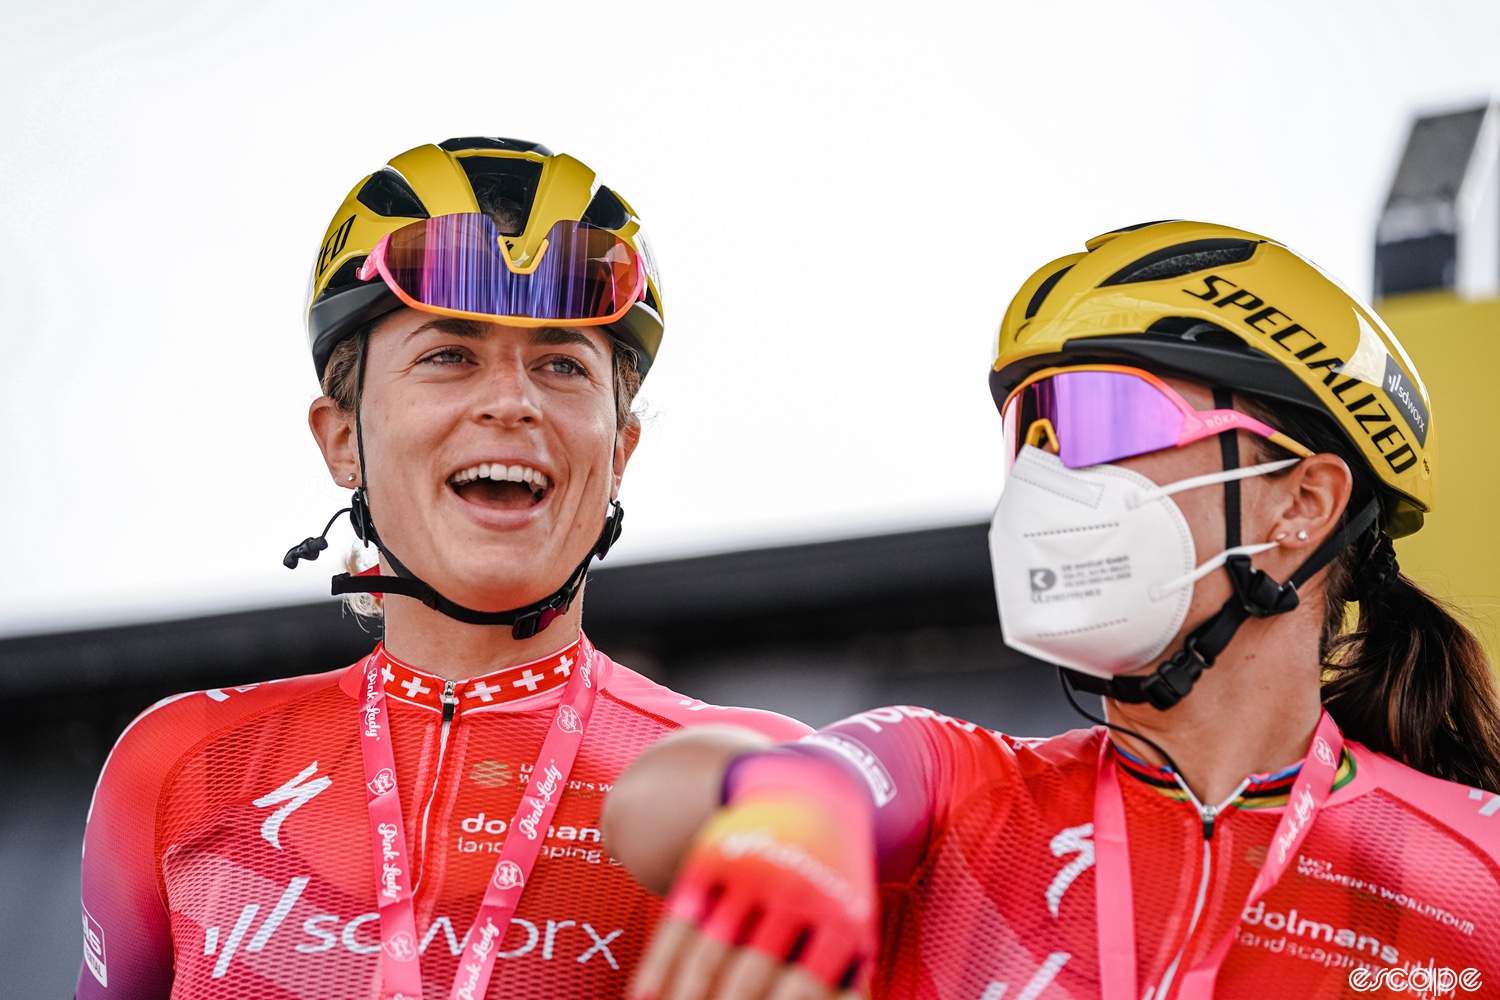 Reusser laughs with a teammate before a stage of the Tour